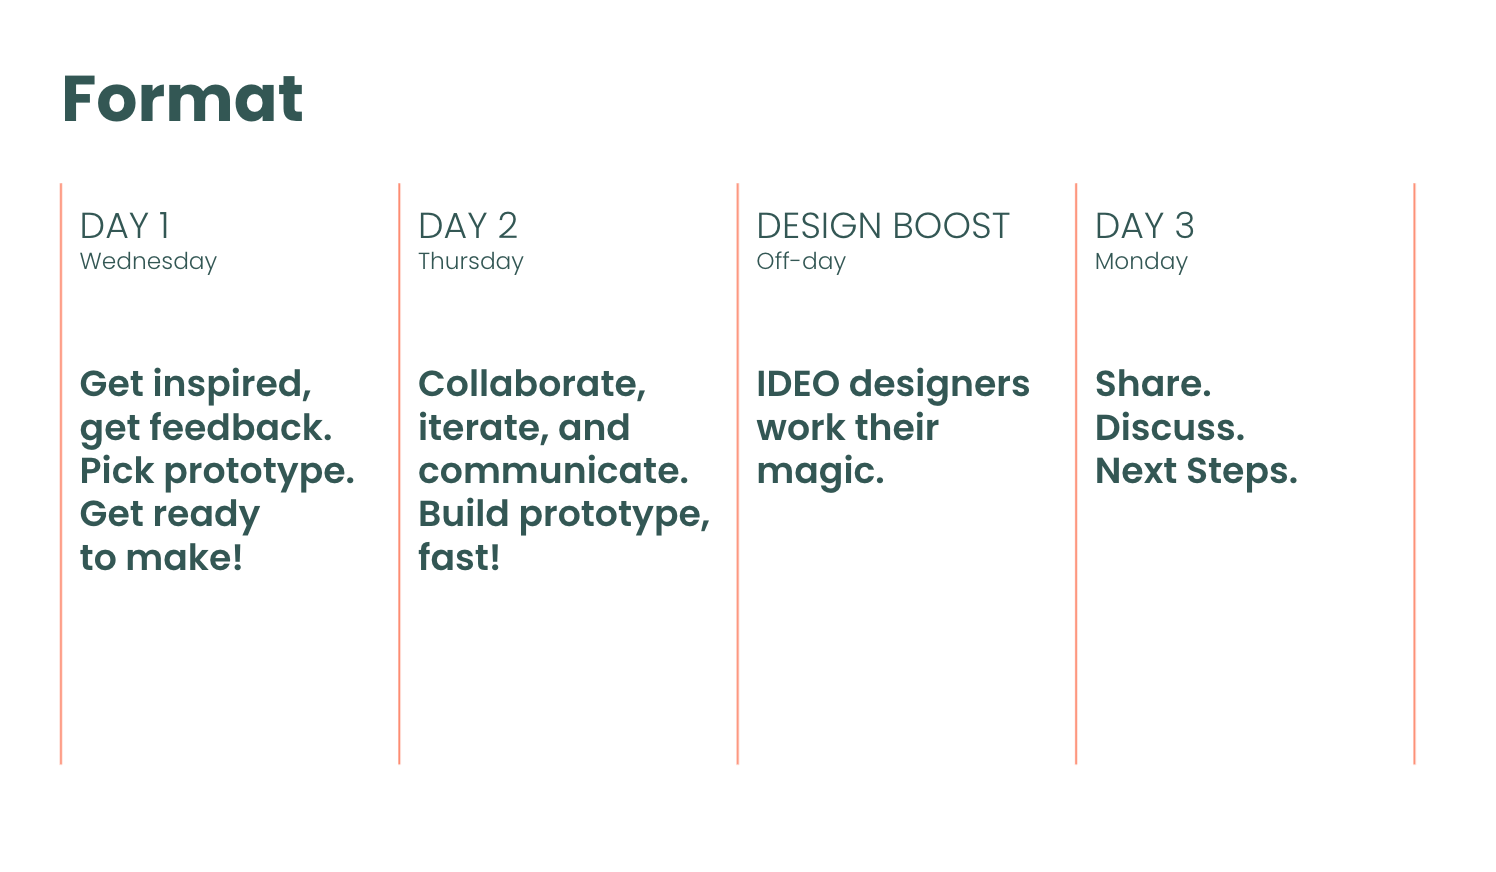 Format. Day 1, Wed: Get inspired, get feedback. Pick prototype. Get ready to make! // Day 2, Thur: Collaborate, iterate, communicate. Build prototype, fast! // Design Boost, Off day: IDEO designers work their magic. // Day 3, Mon: Share. Discuss. Next steps.